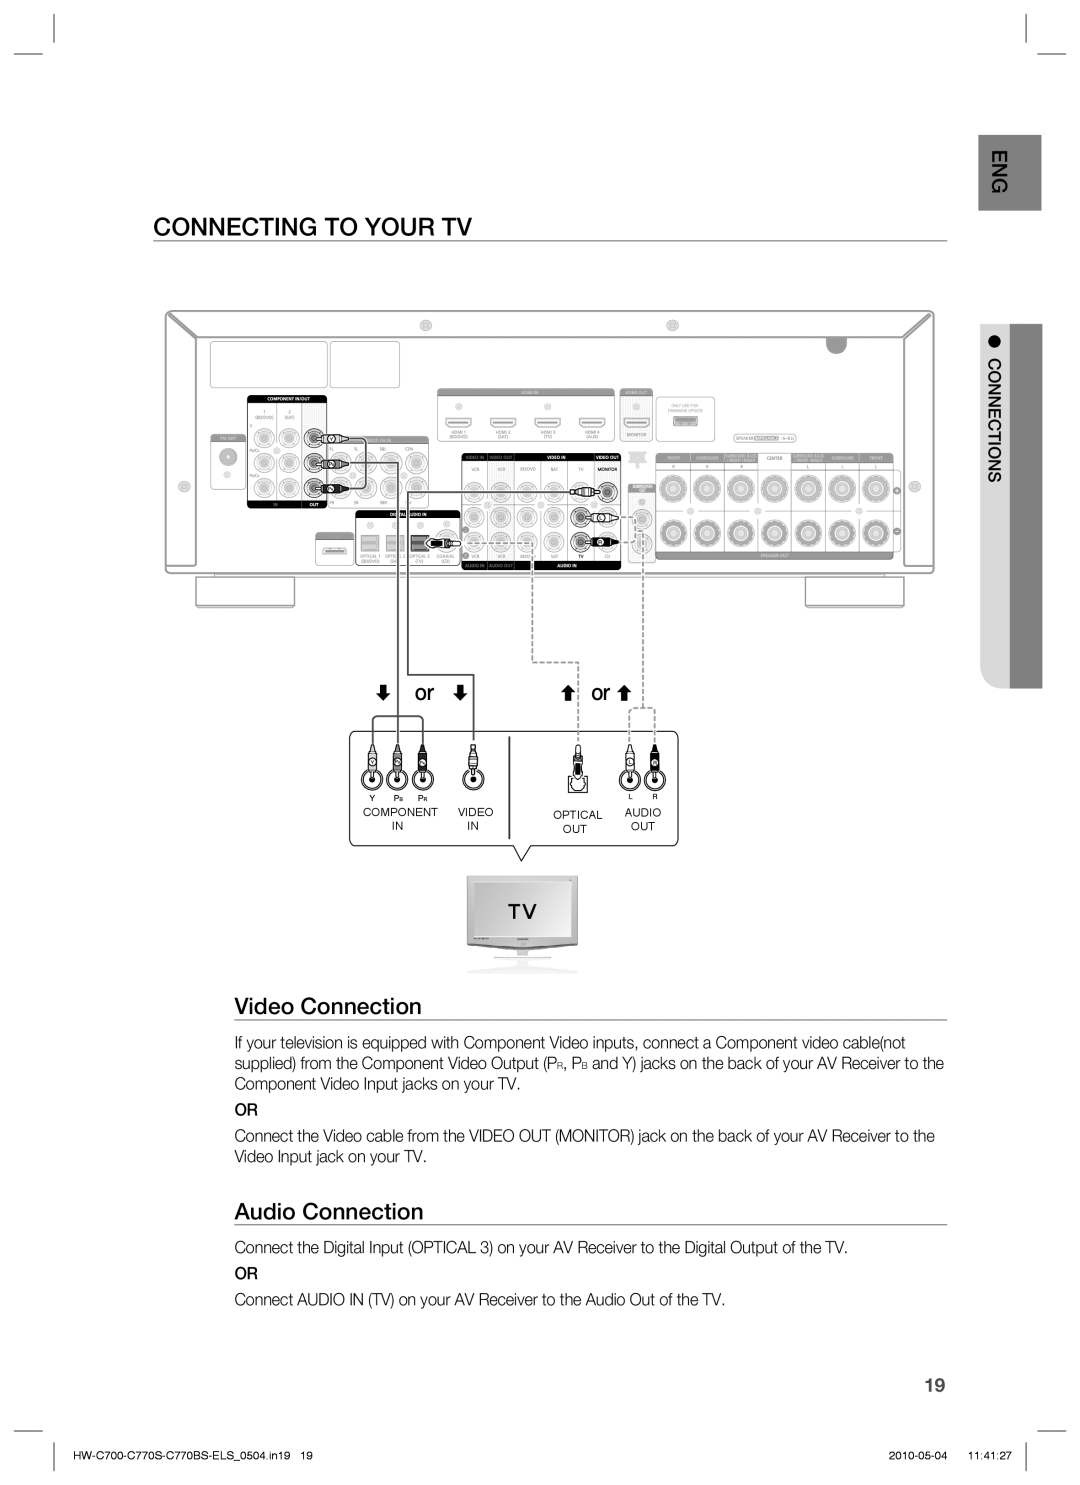 Samsung HW-C700B/XEN, HW-C770S/XEN, HW-C700/XEN manual Connecting To Your Tv, or or, Video Connection, Audio Connection 